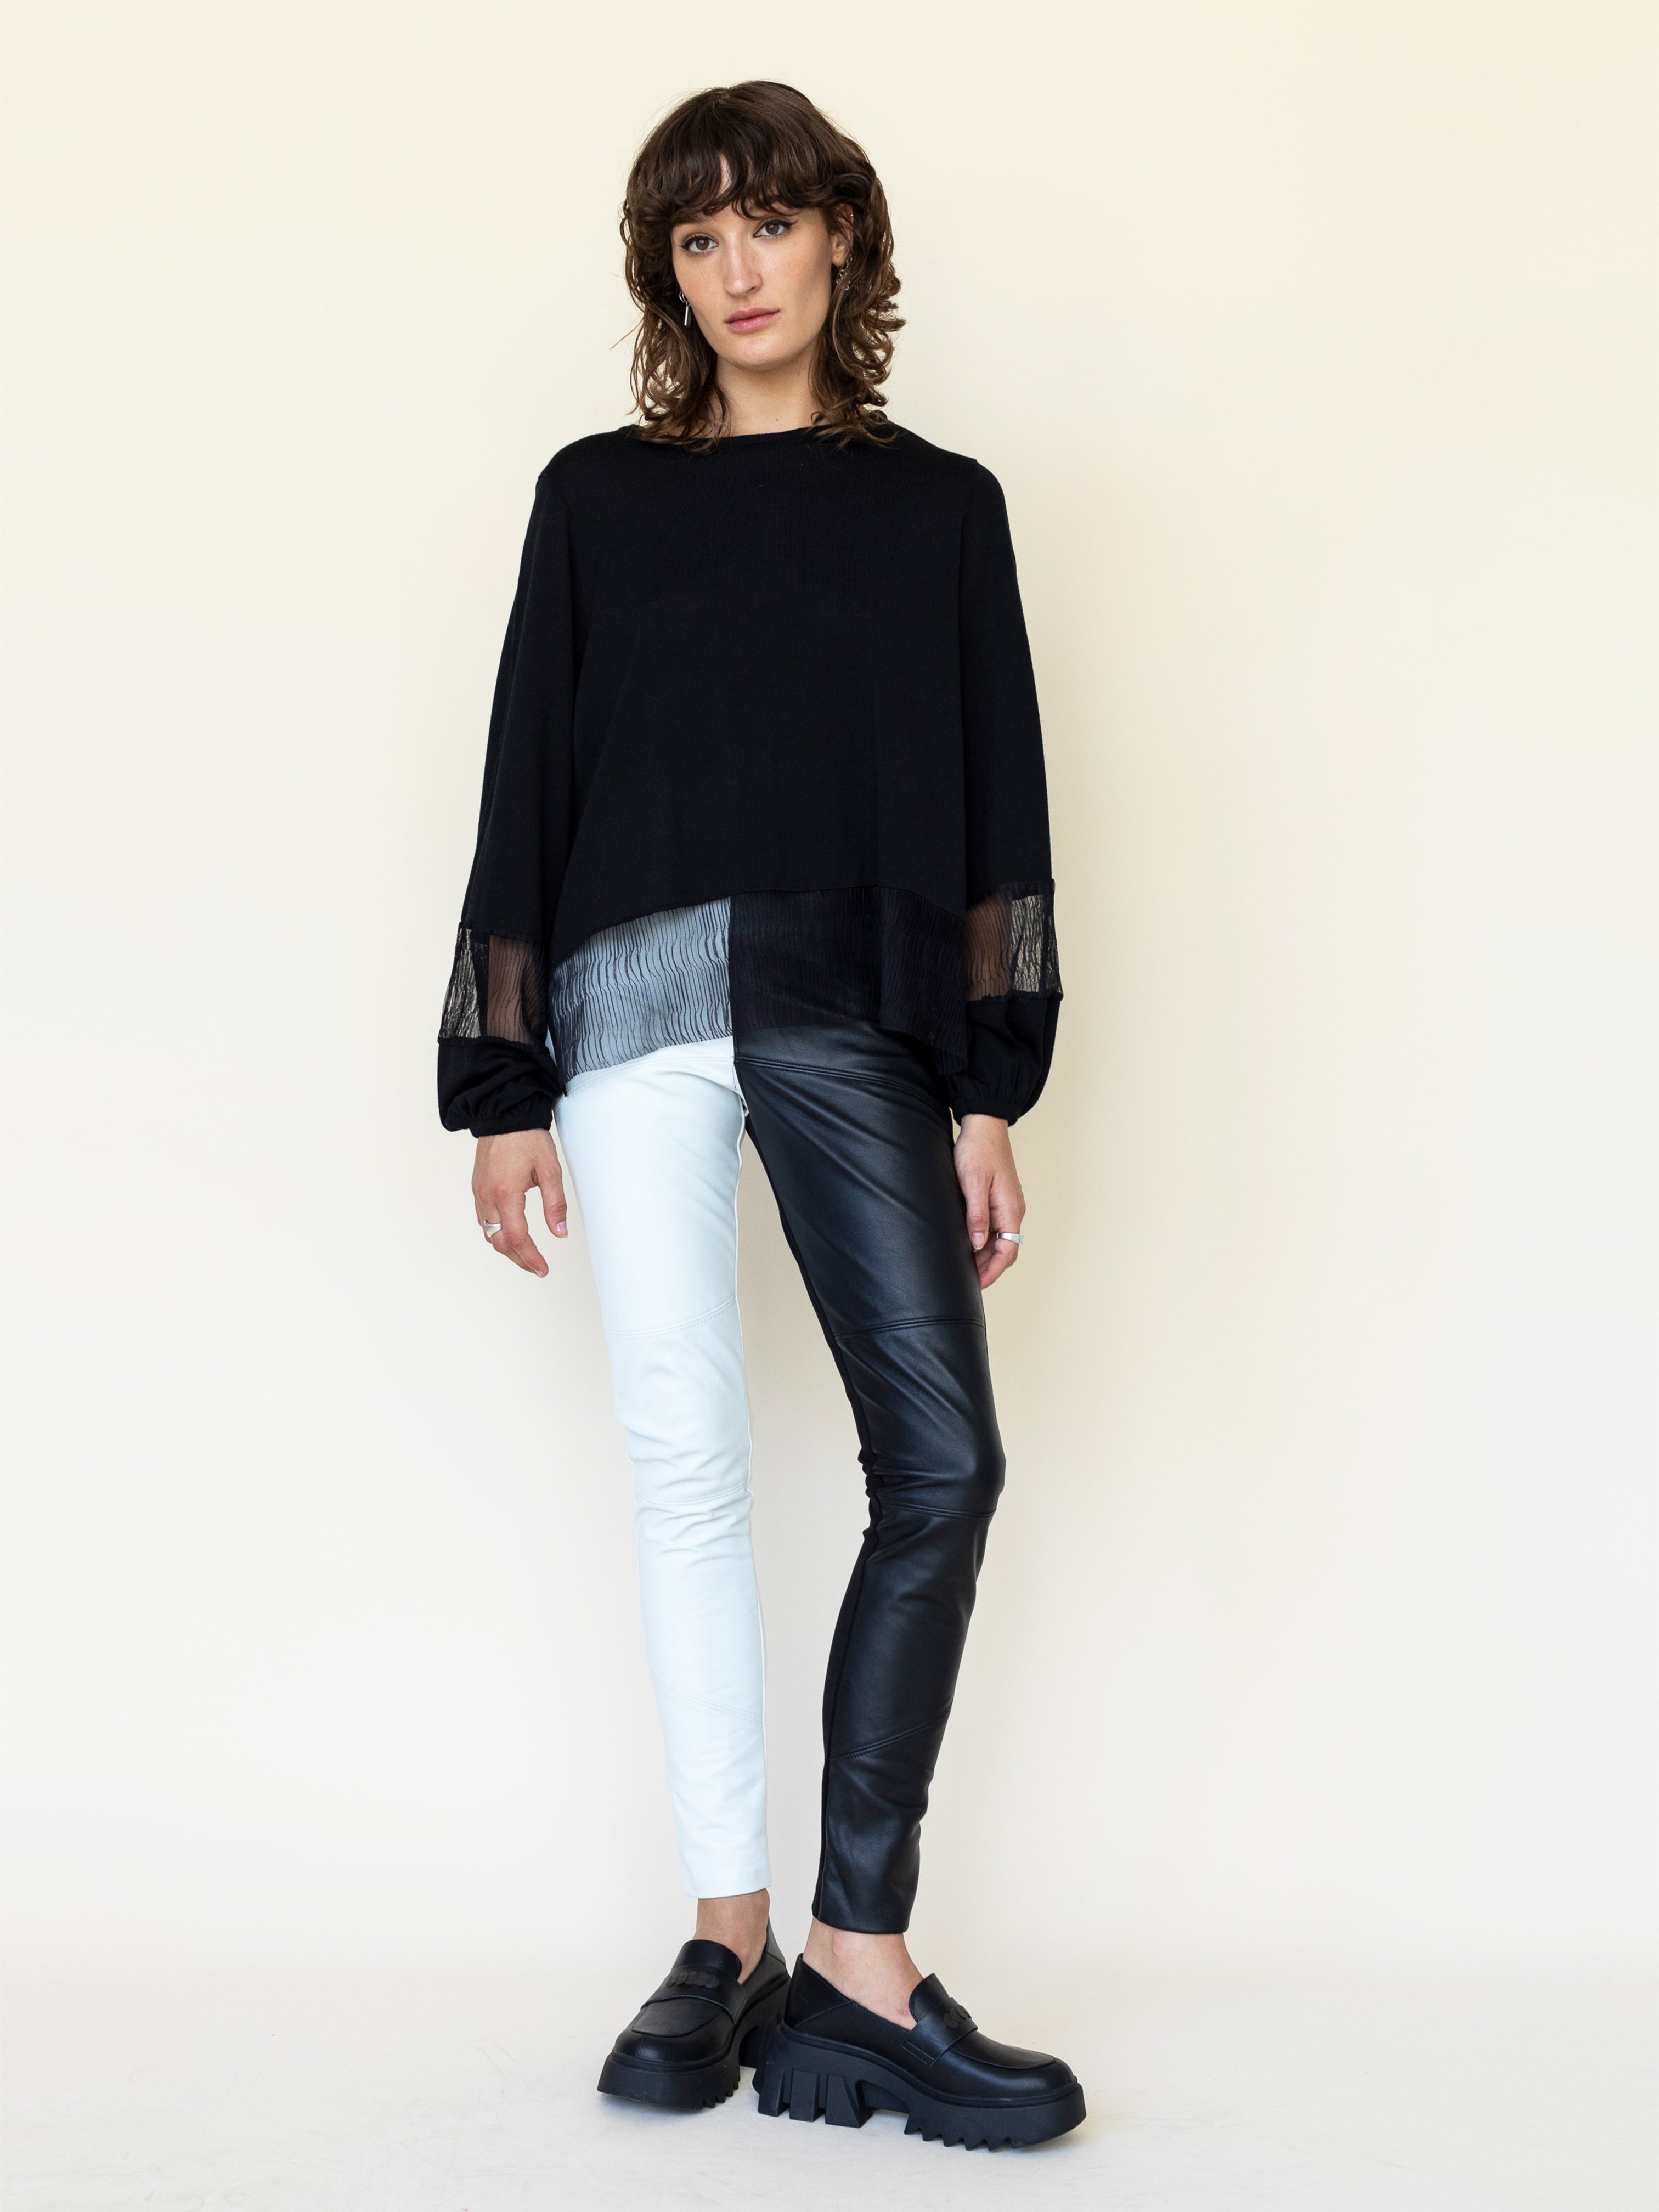 Monochrome Leather Front Paneled Pants in Black and White Blocking